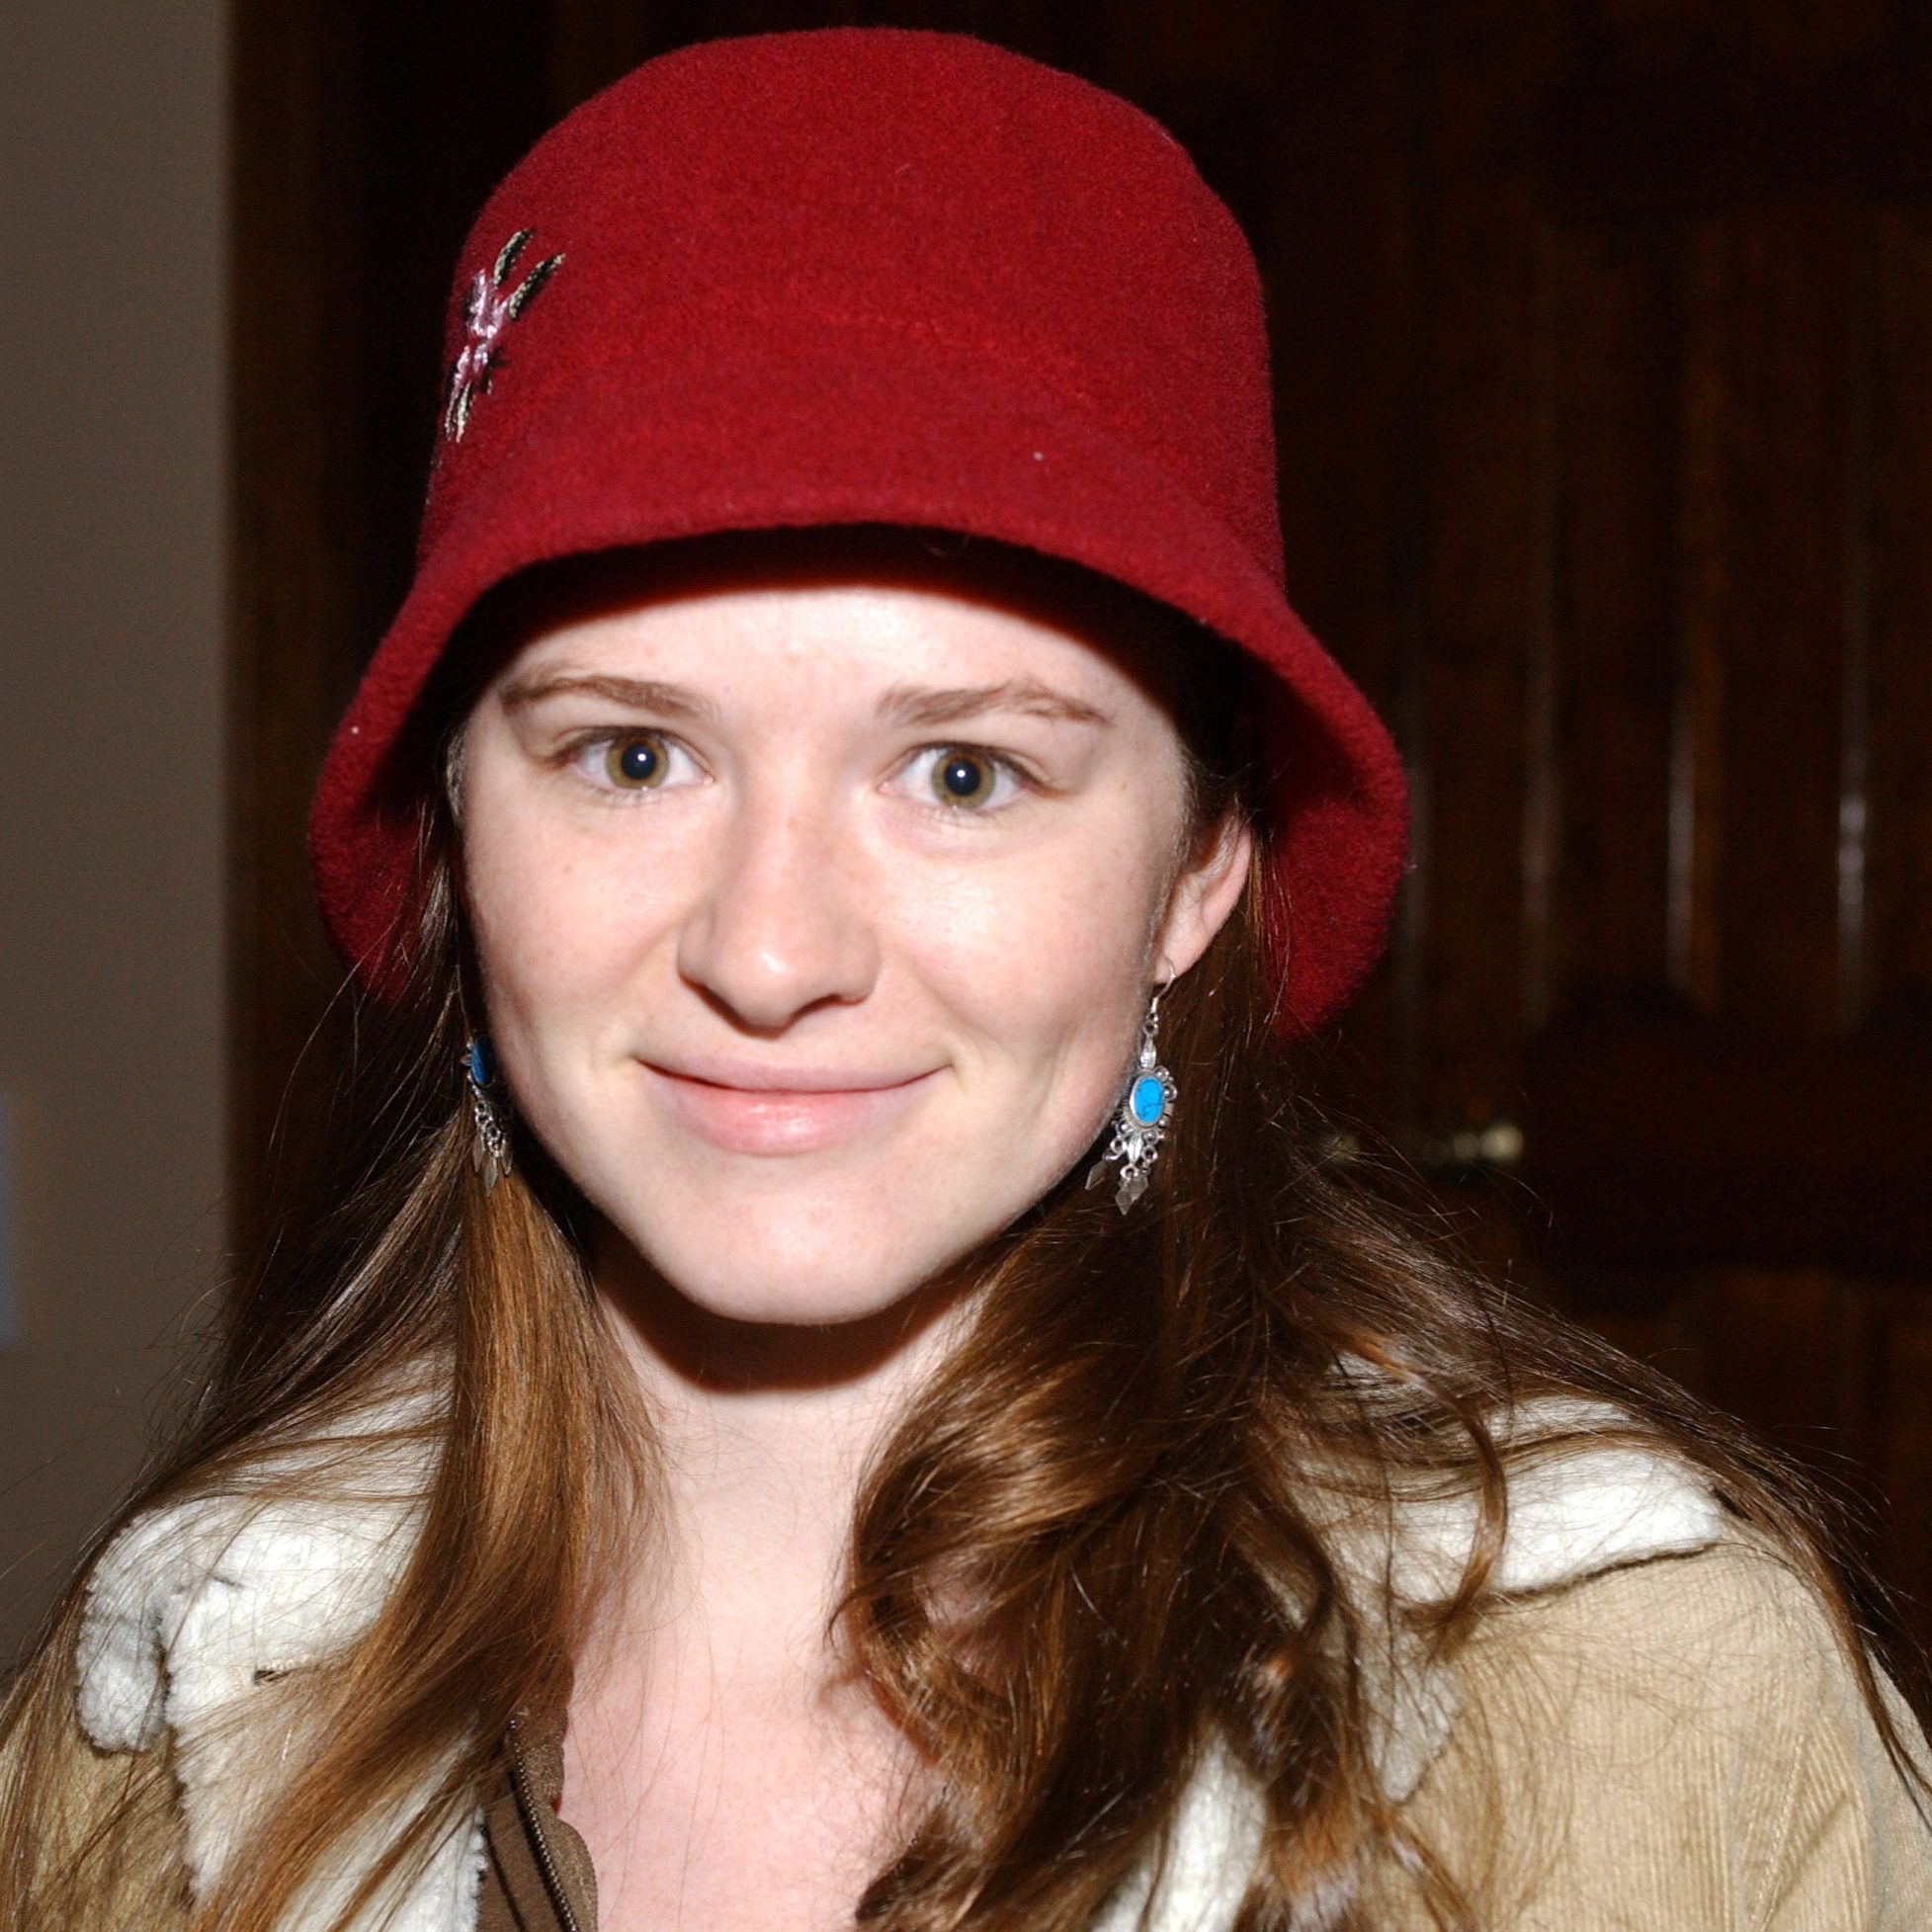 The actress who played April Kepner in 'Grey's Anatomy' pictured in 2005